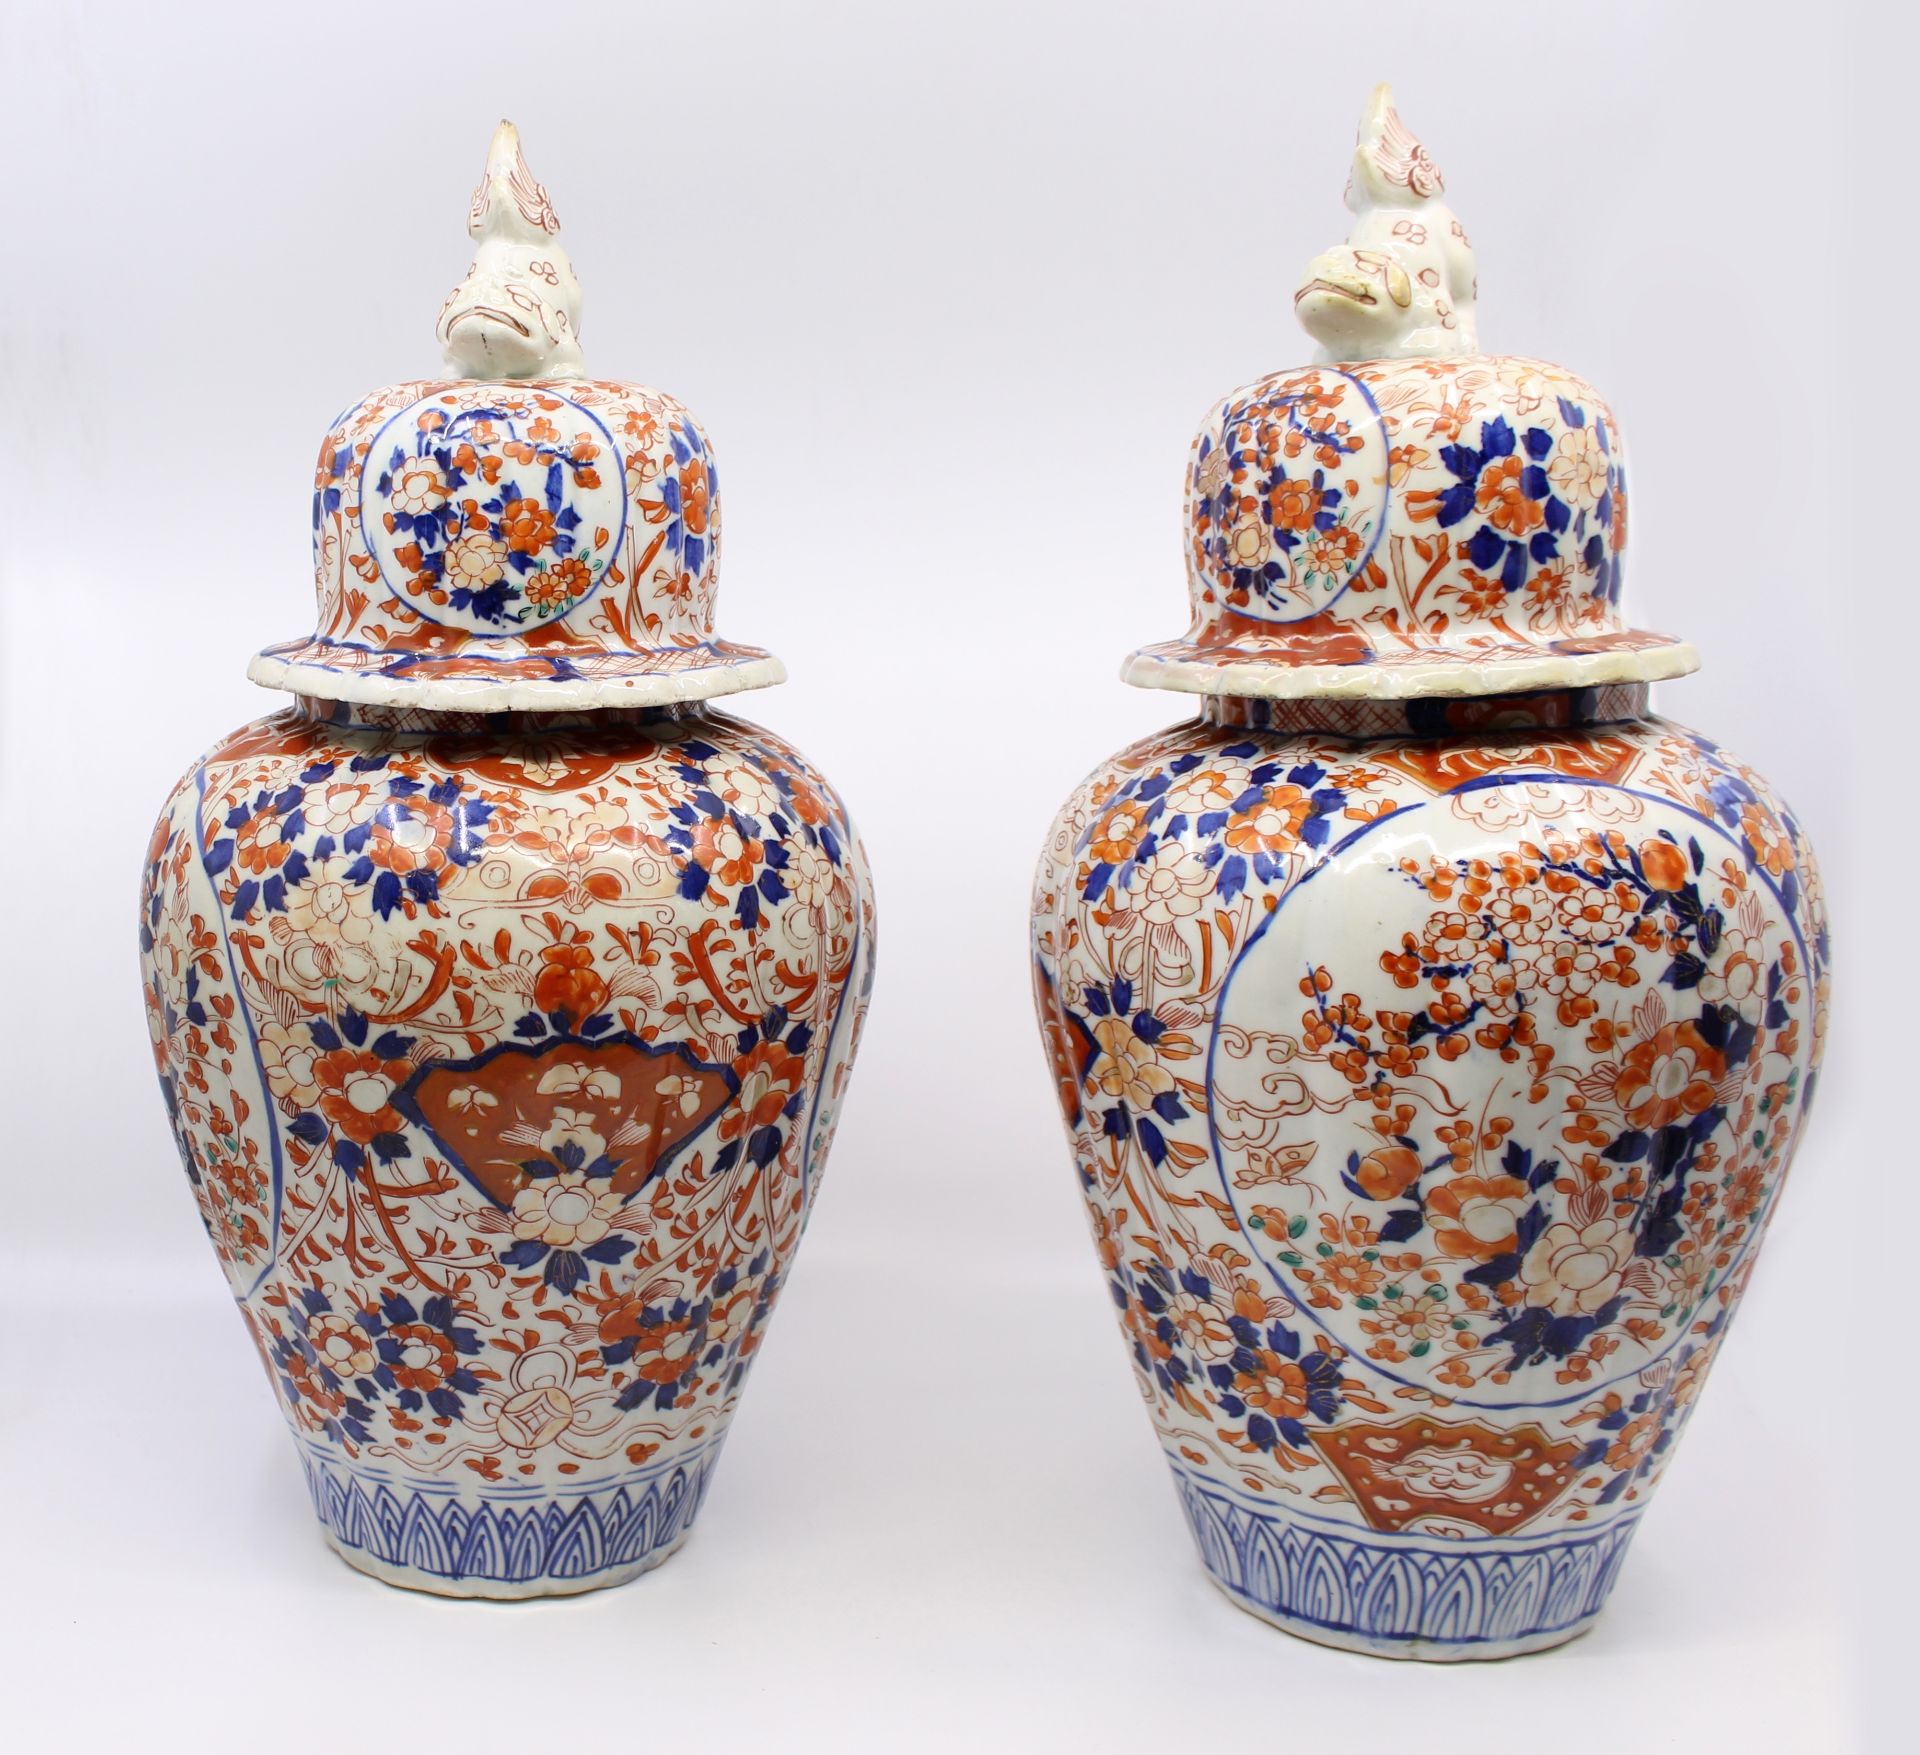 Pair of Antique Chinese Lidded Urns - Image 6 of 10